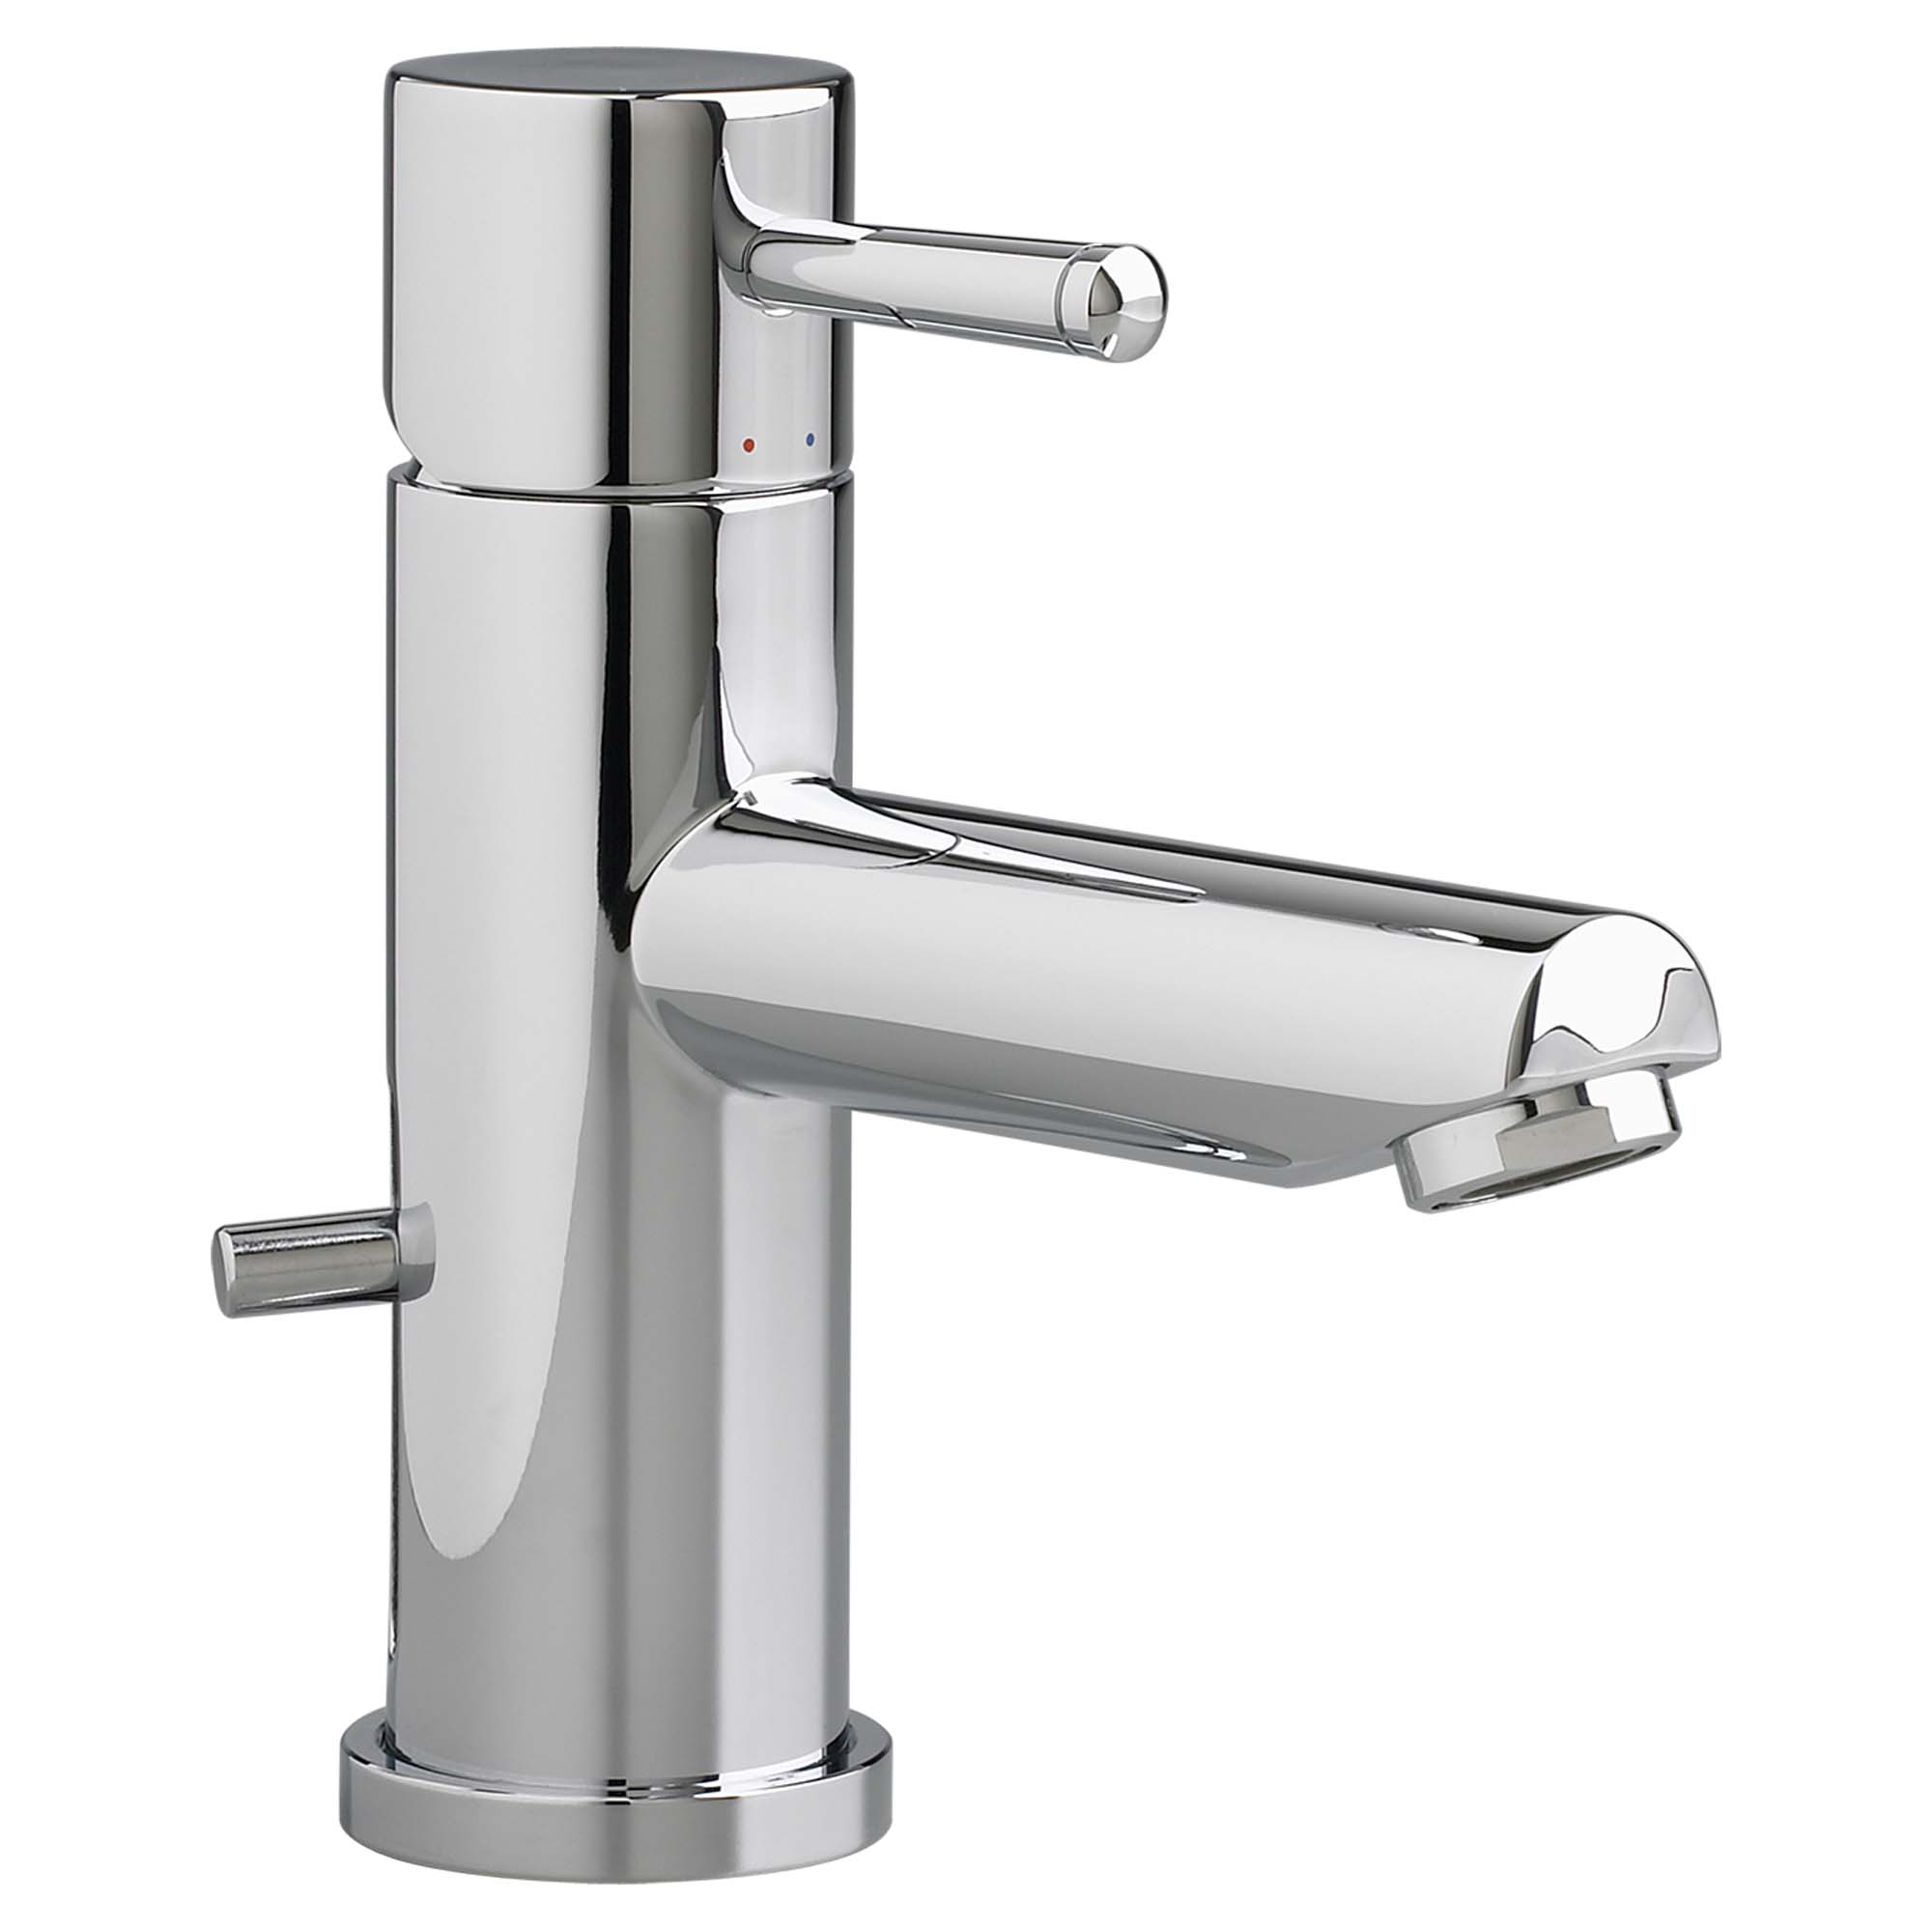 Serin® Single Hole Single-Handle Bathroom Faucet 1.2 gpm/4.5 L/min With Lever Handle Less Drain